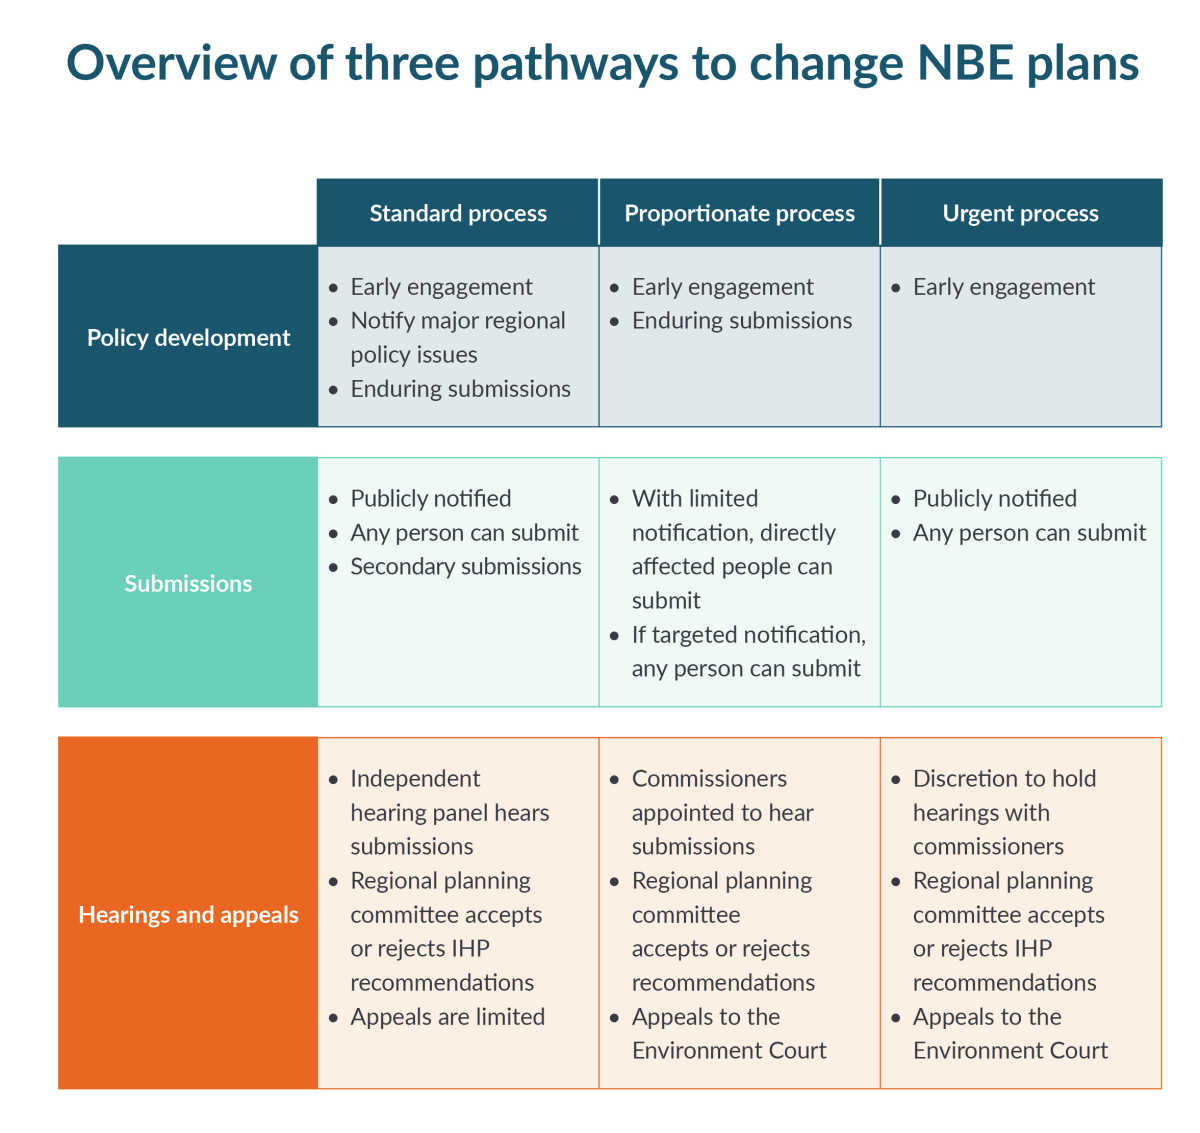 NBE plans